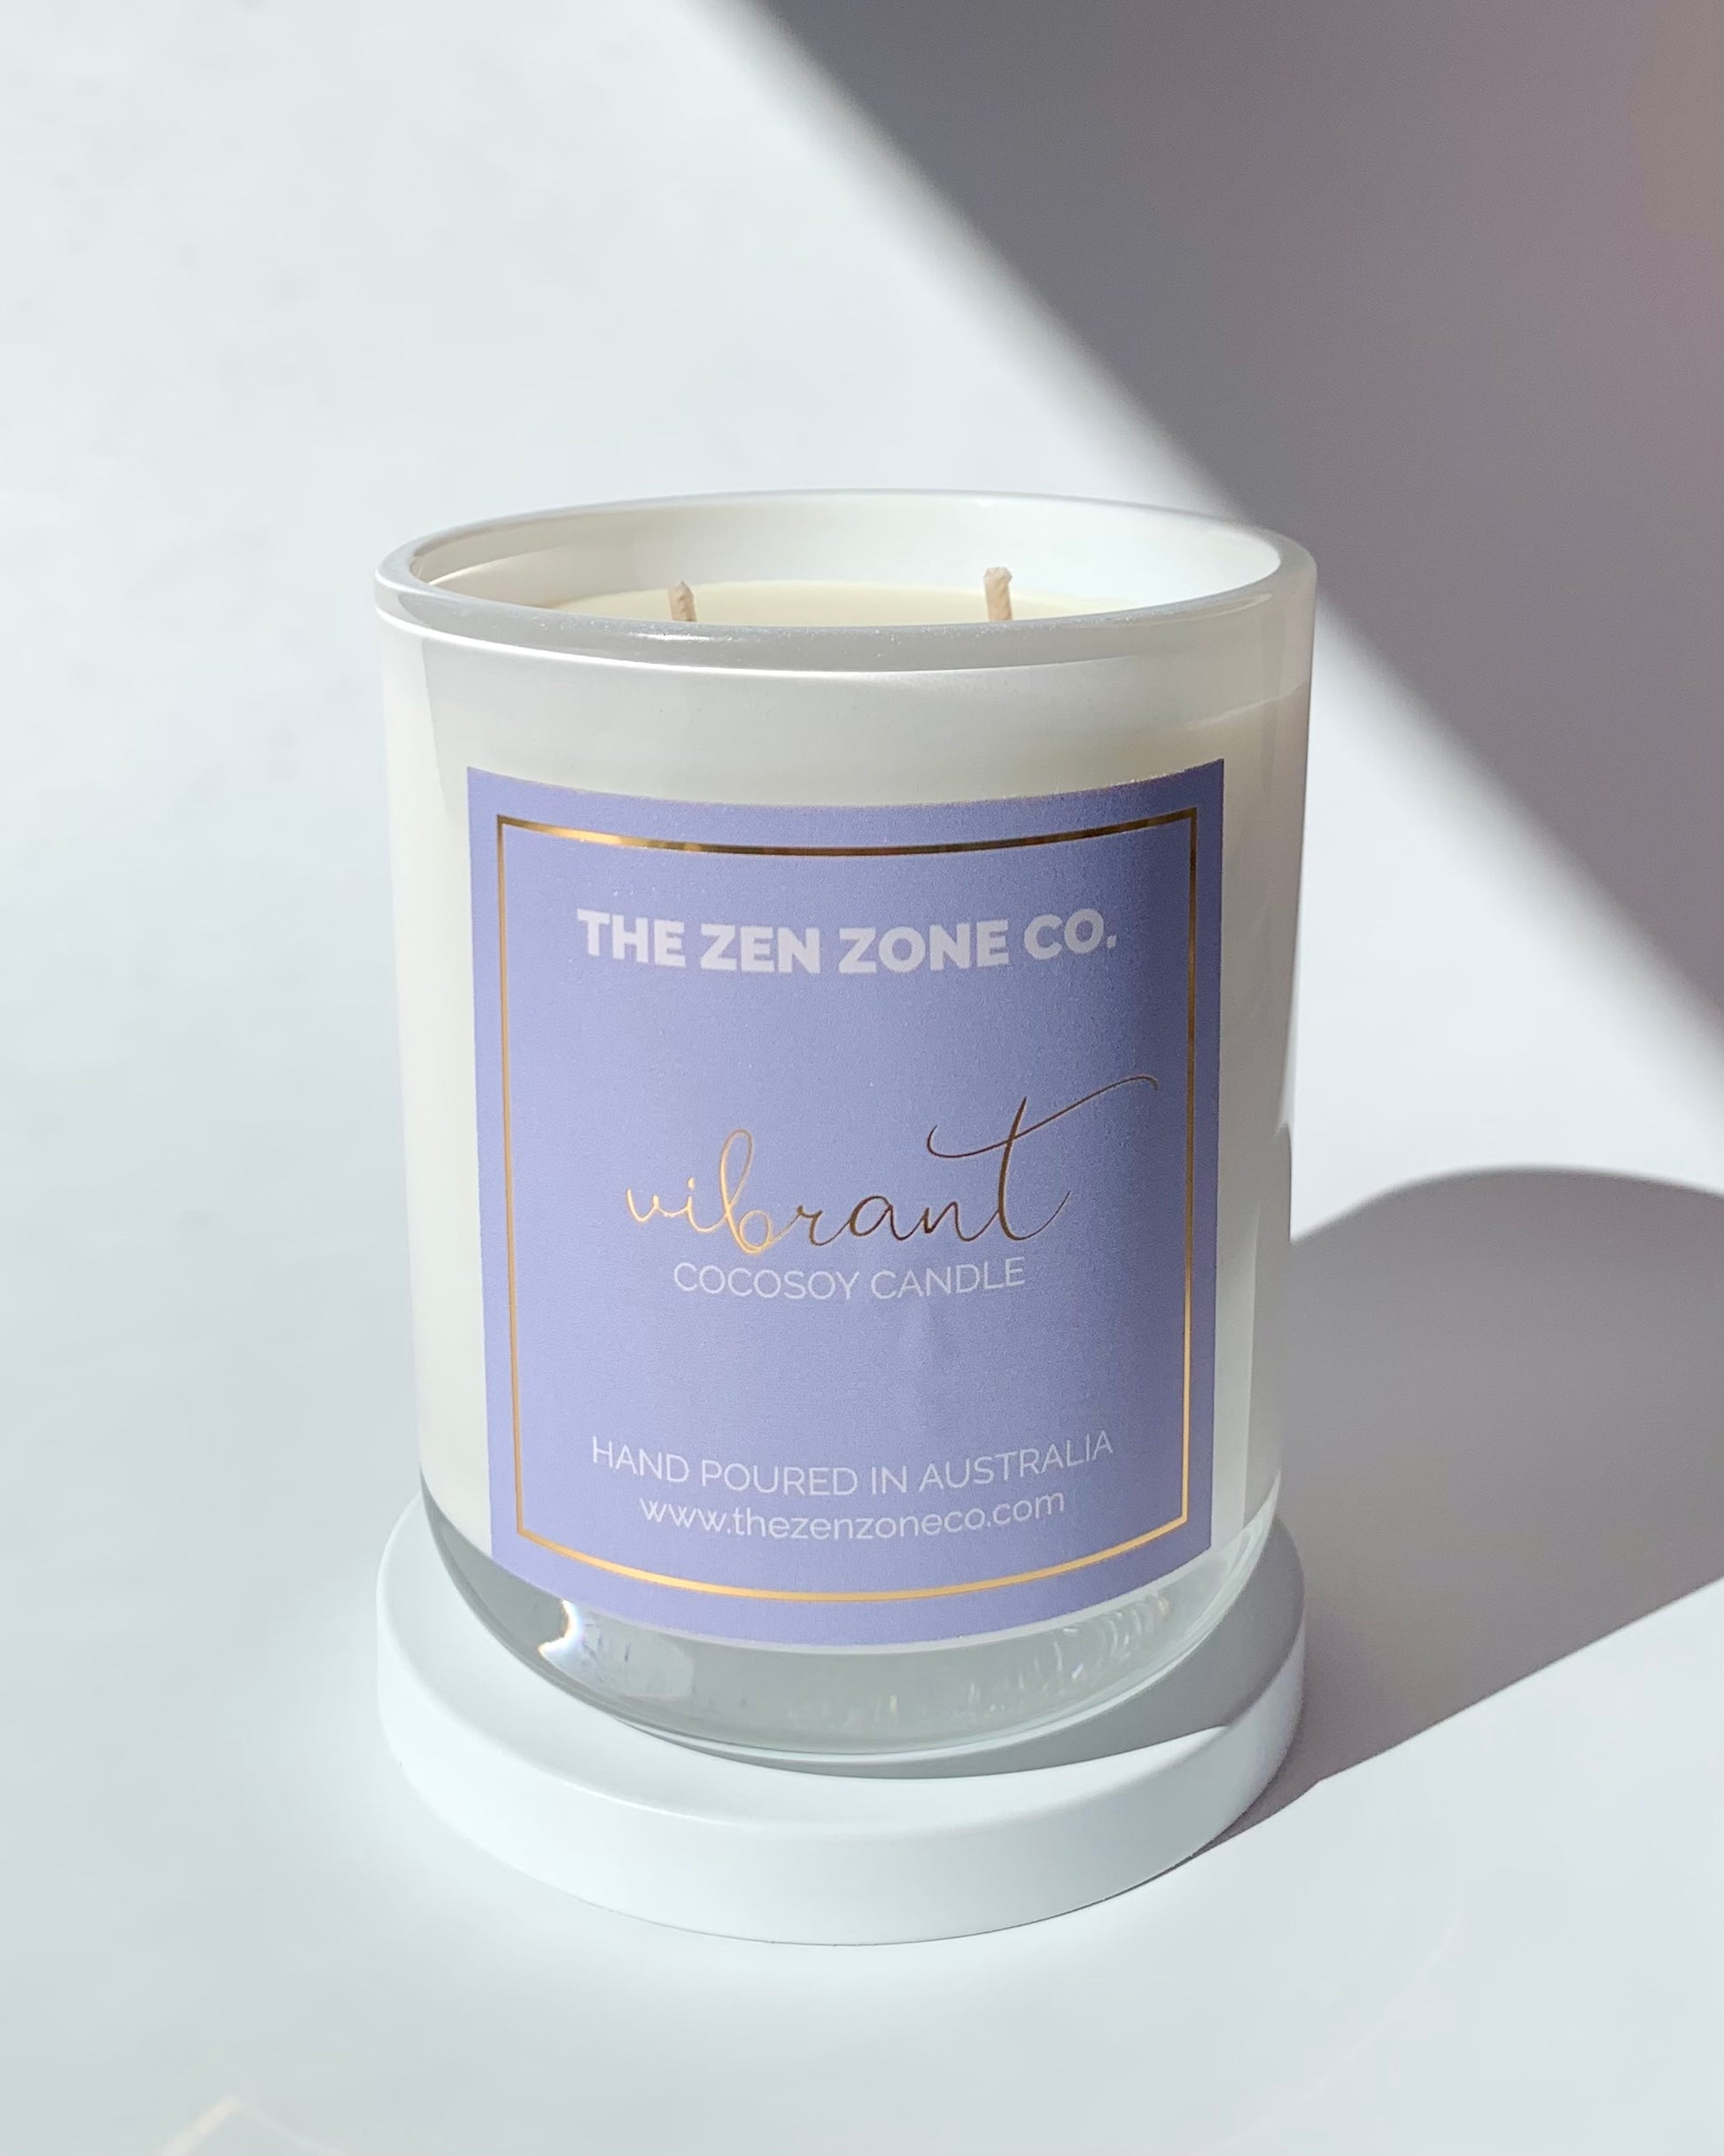 blackcurrant rose candle by The Zen Zone Co